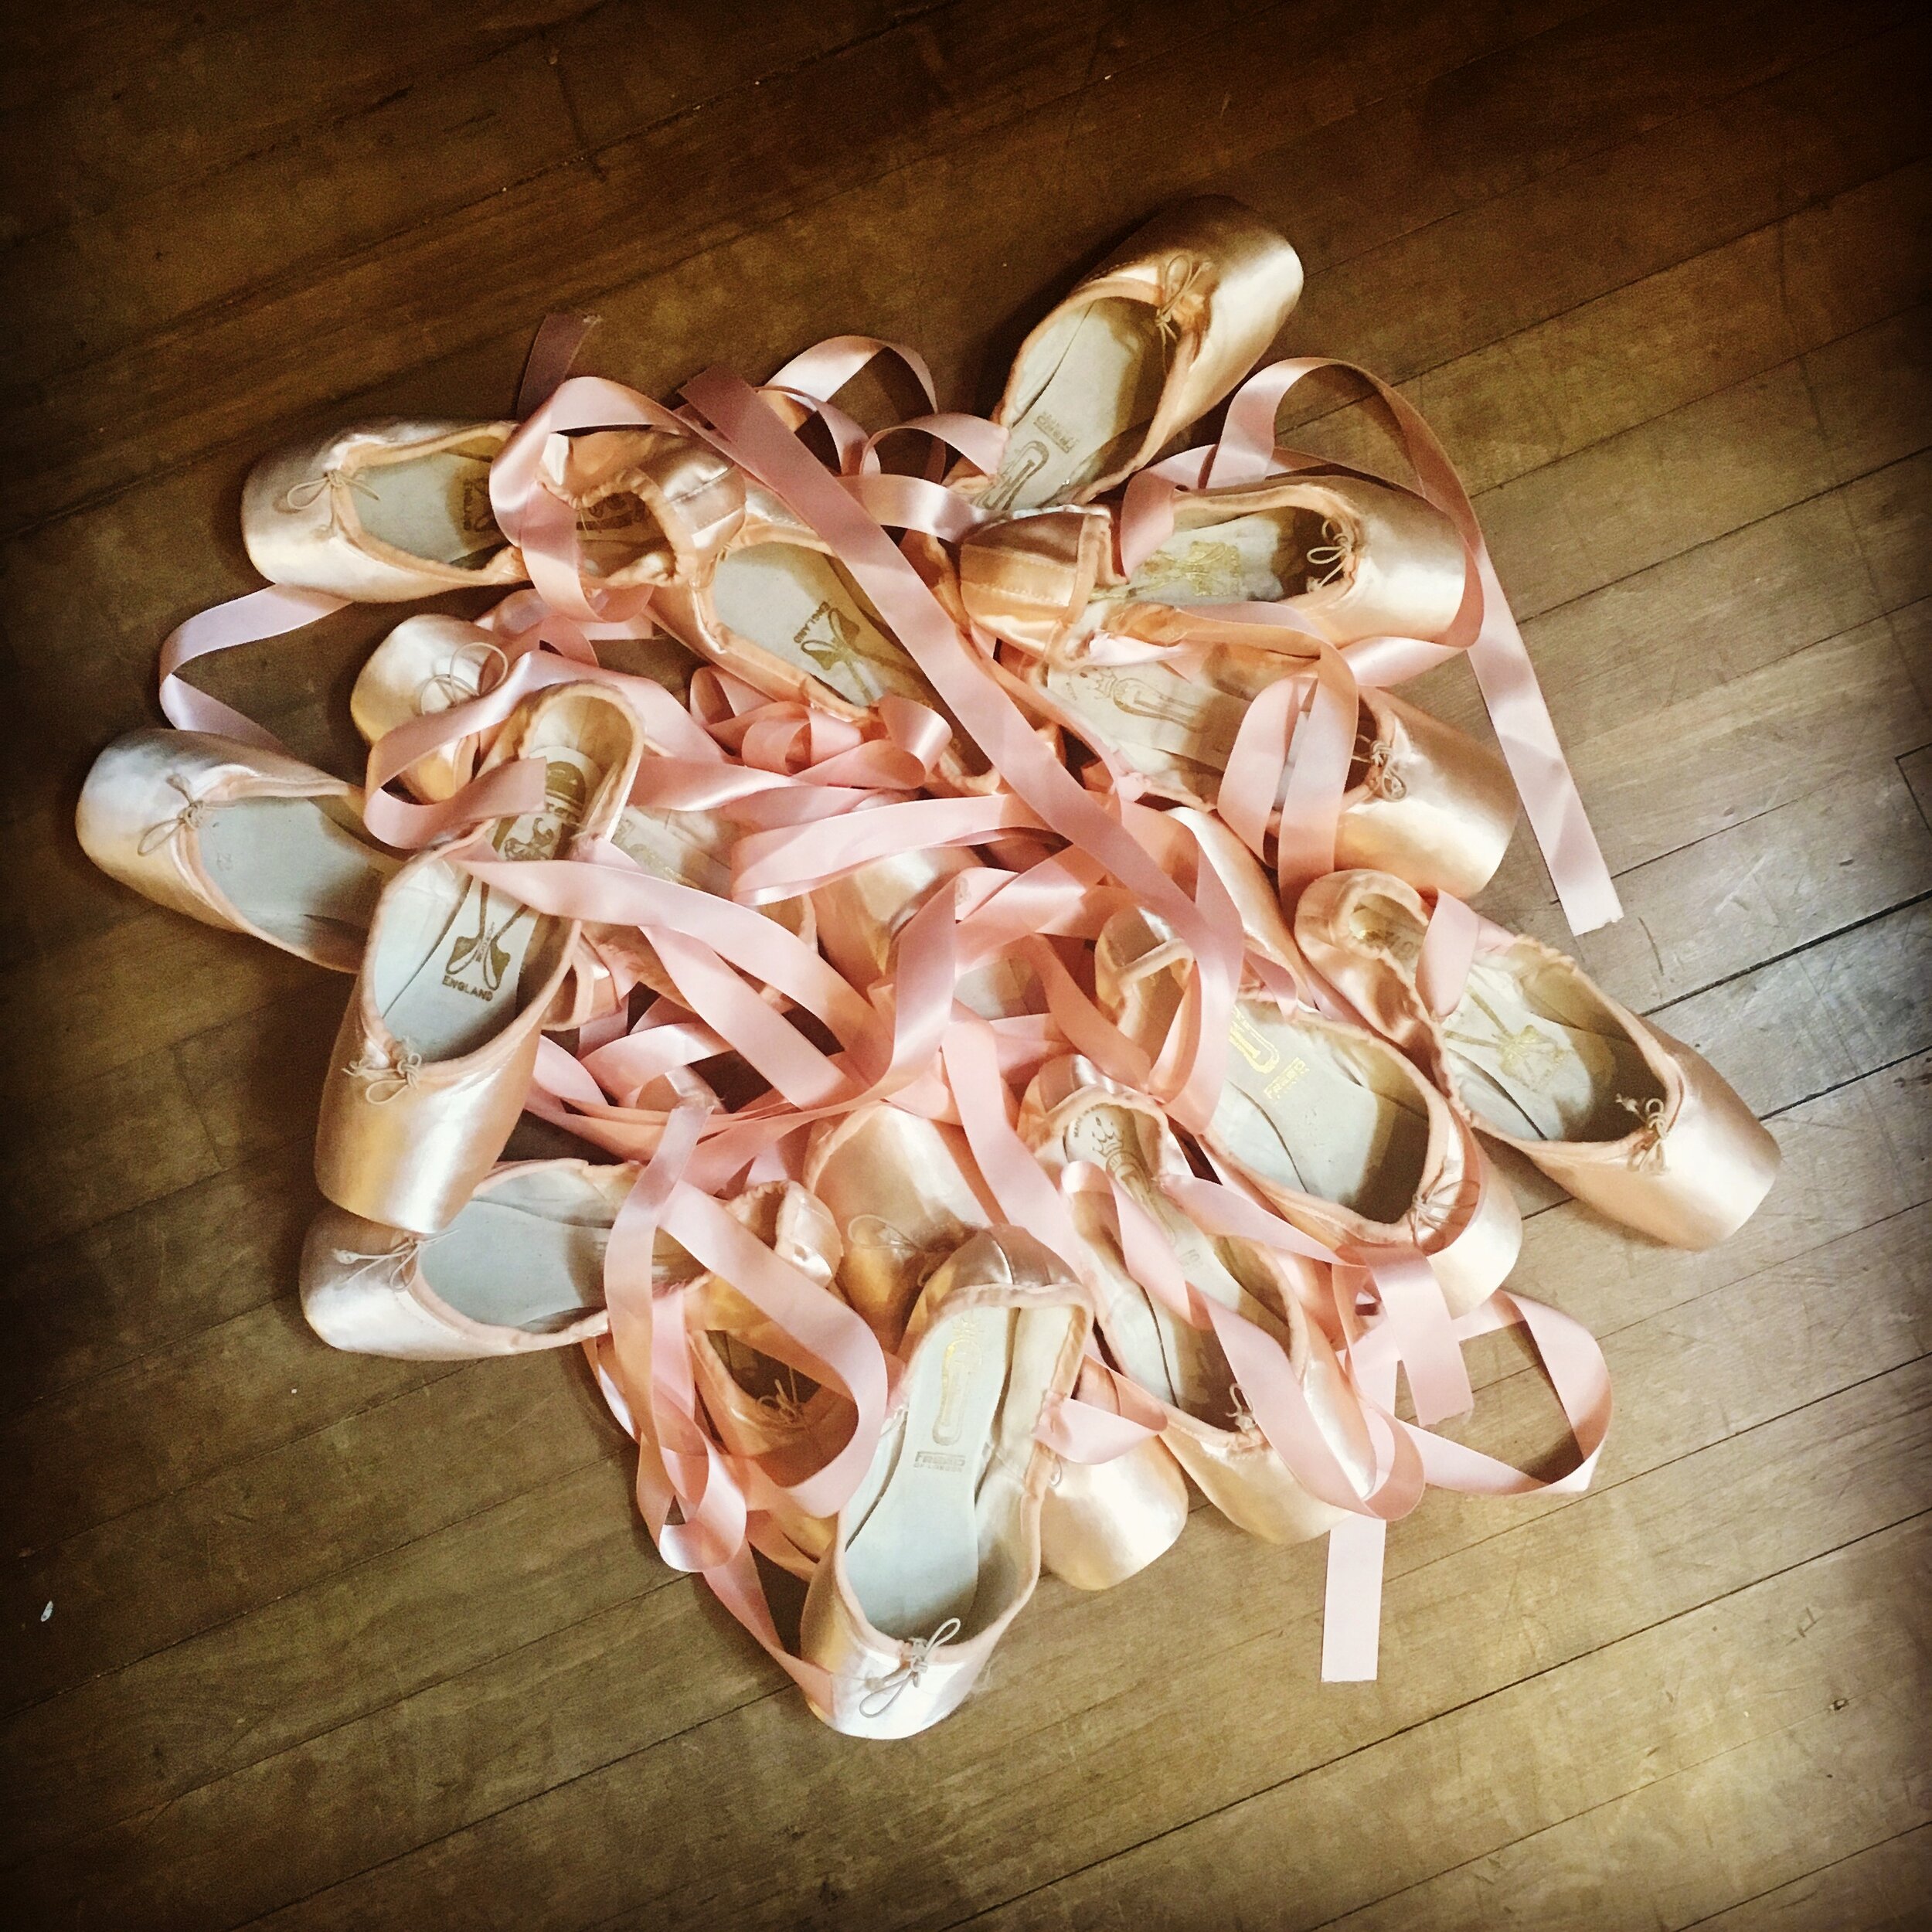 Toeing the Line: The Gender Politics of Pointe Shoes — Amy Seiwert's Imagery